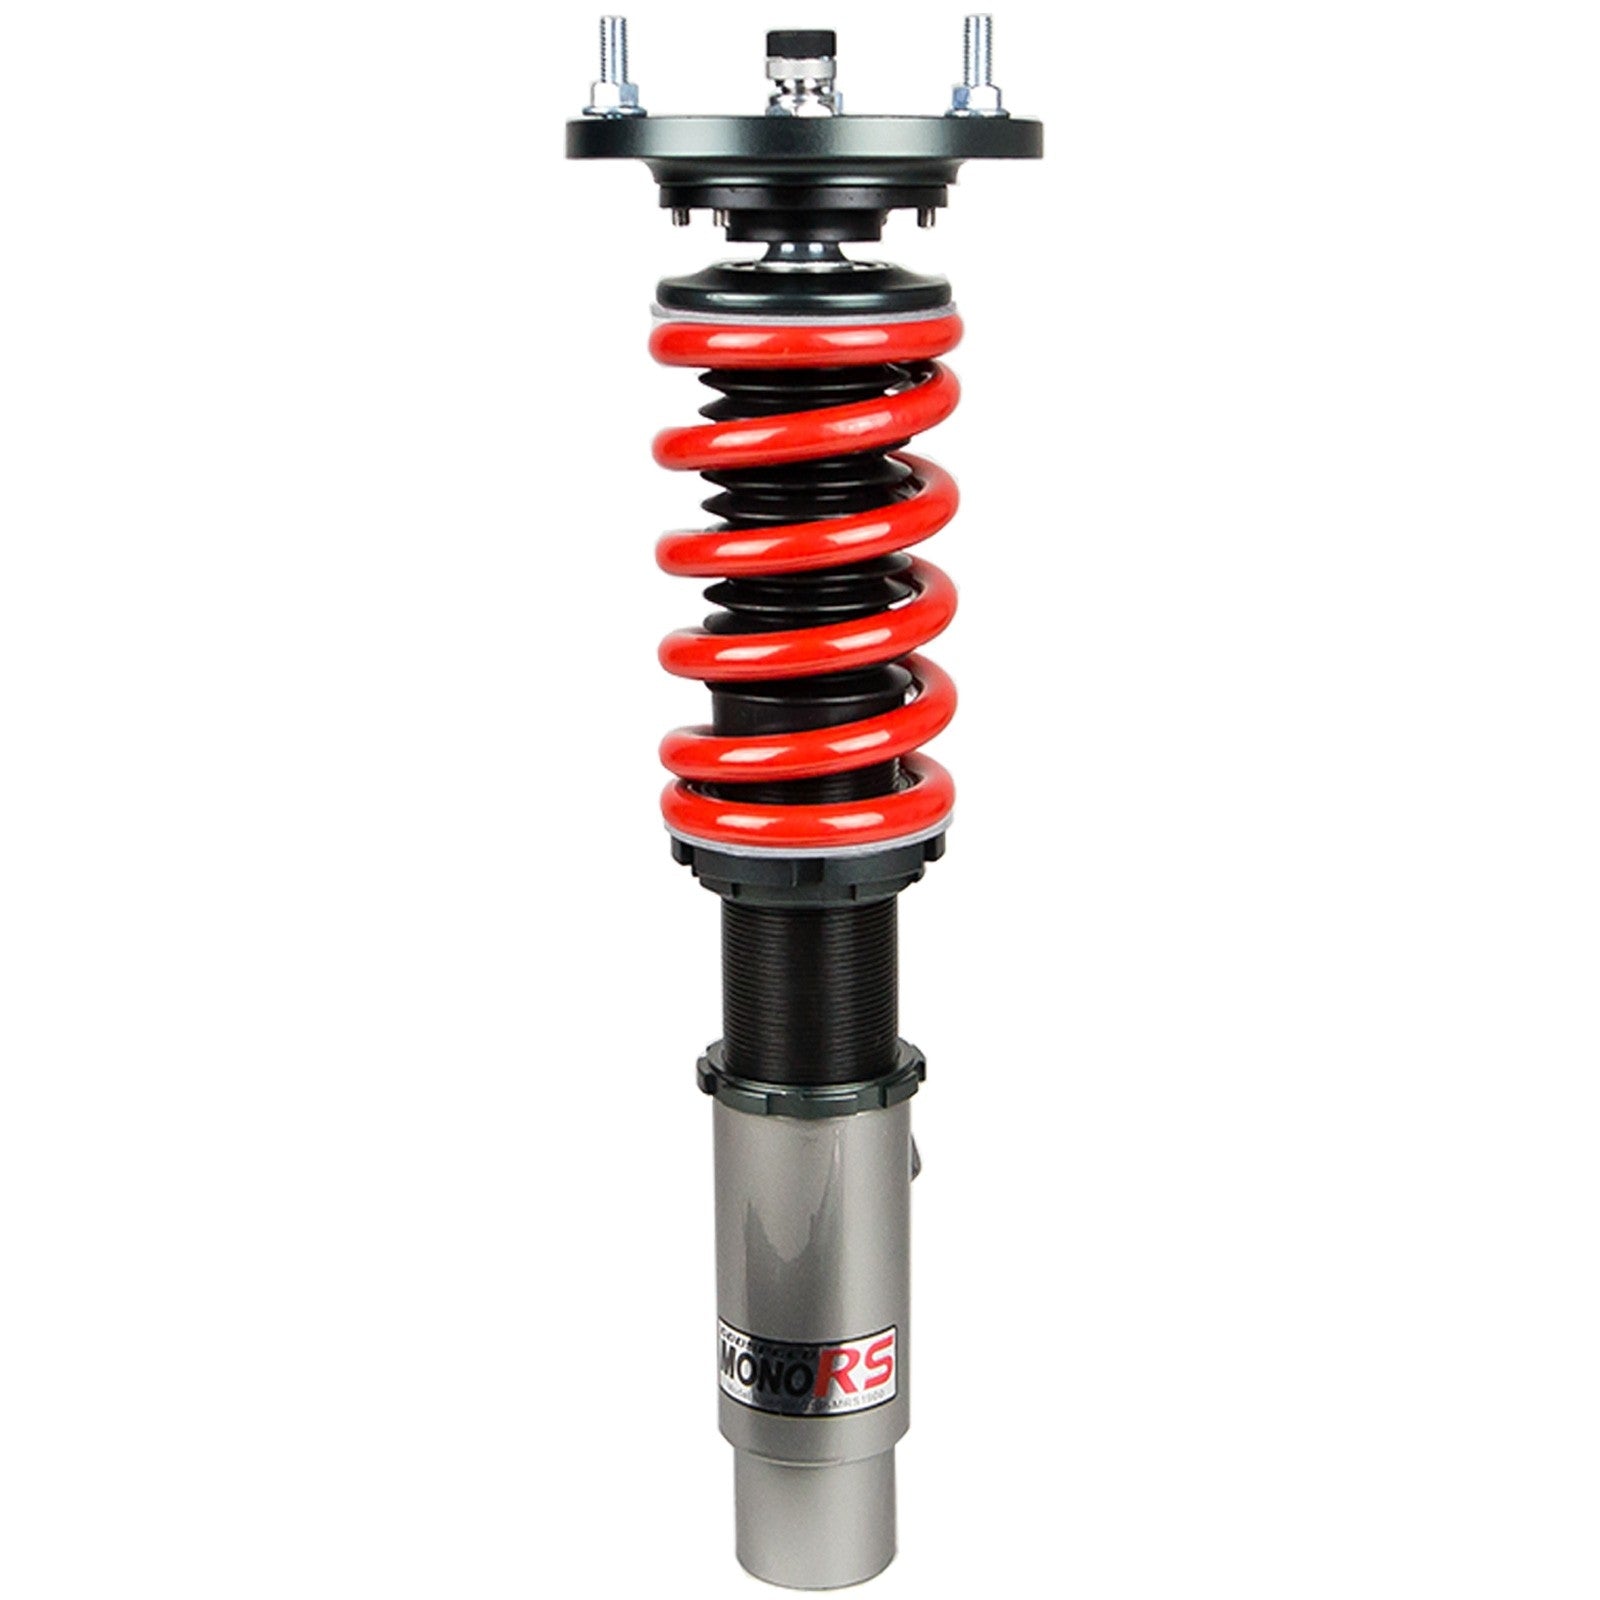 Godspeed MRS1630 MonoRS Coilover Lowering Kit, 32 Damping Adjustment, Ride Height Adjustable